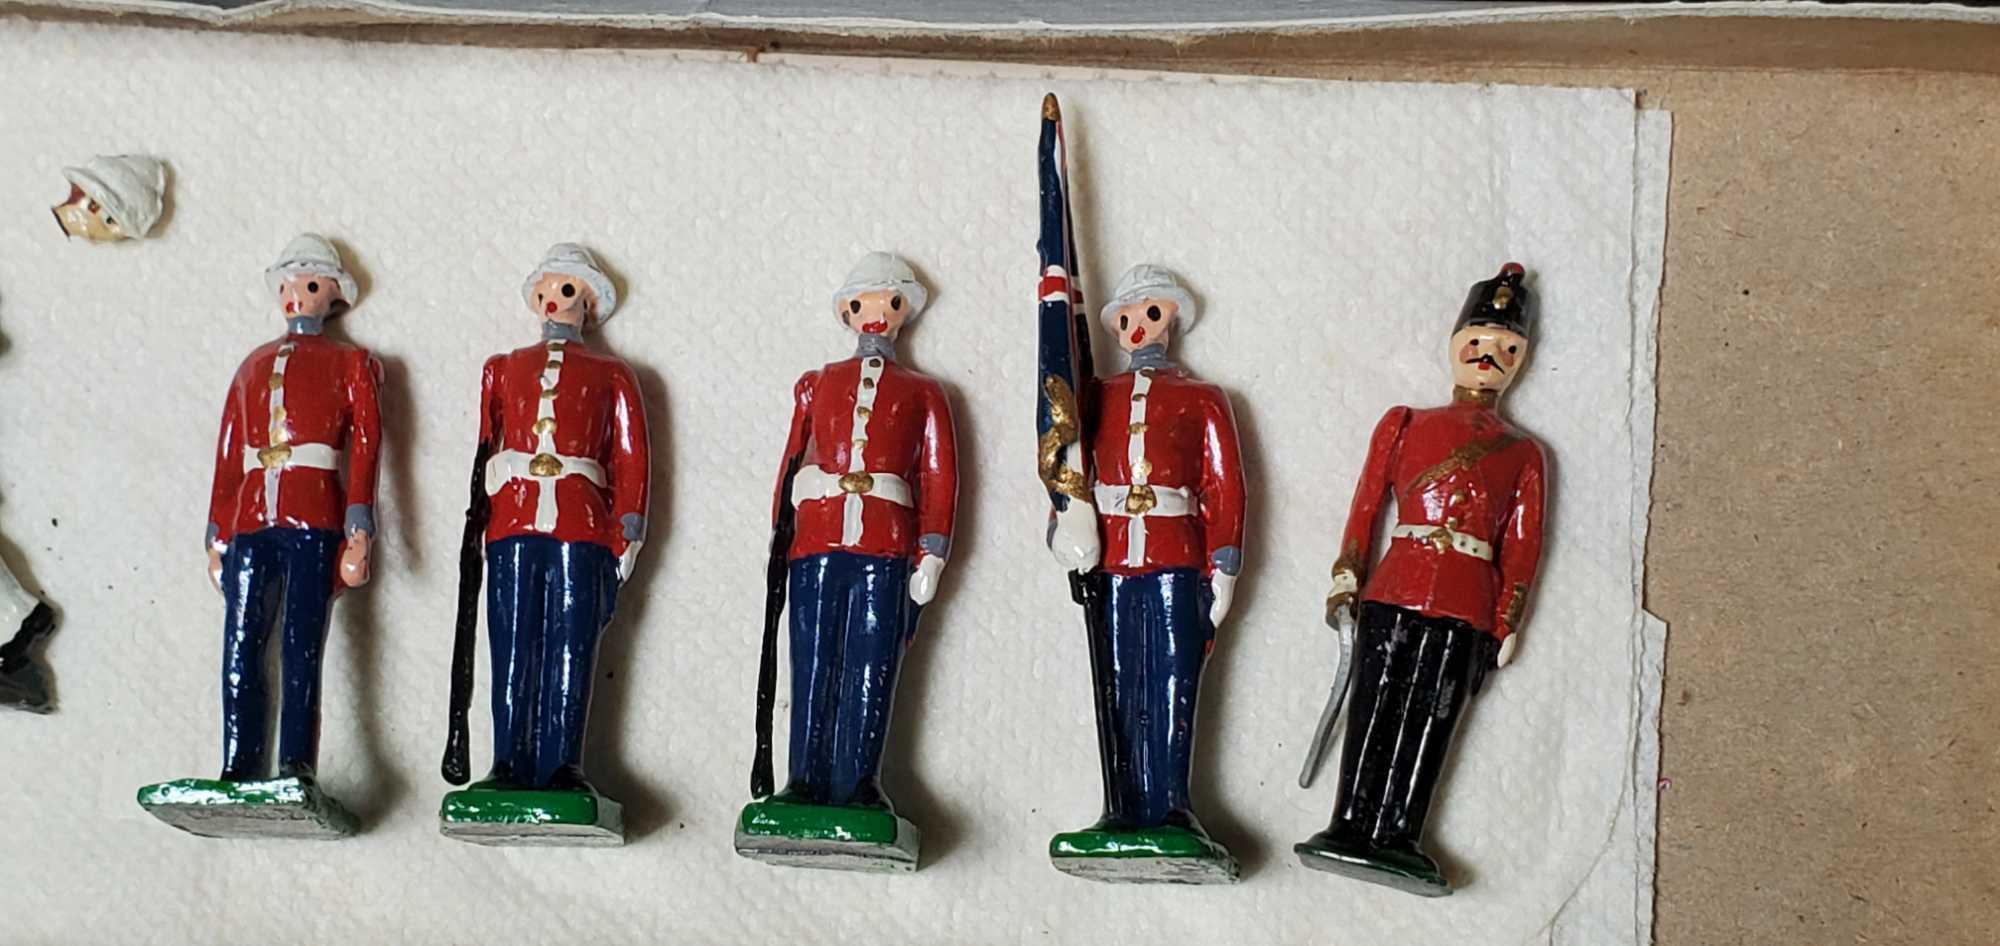 2 Boxes of Vintage Hand Painted Toy Soldiers